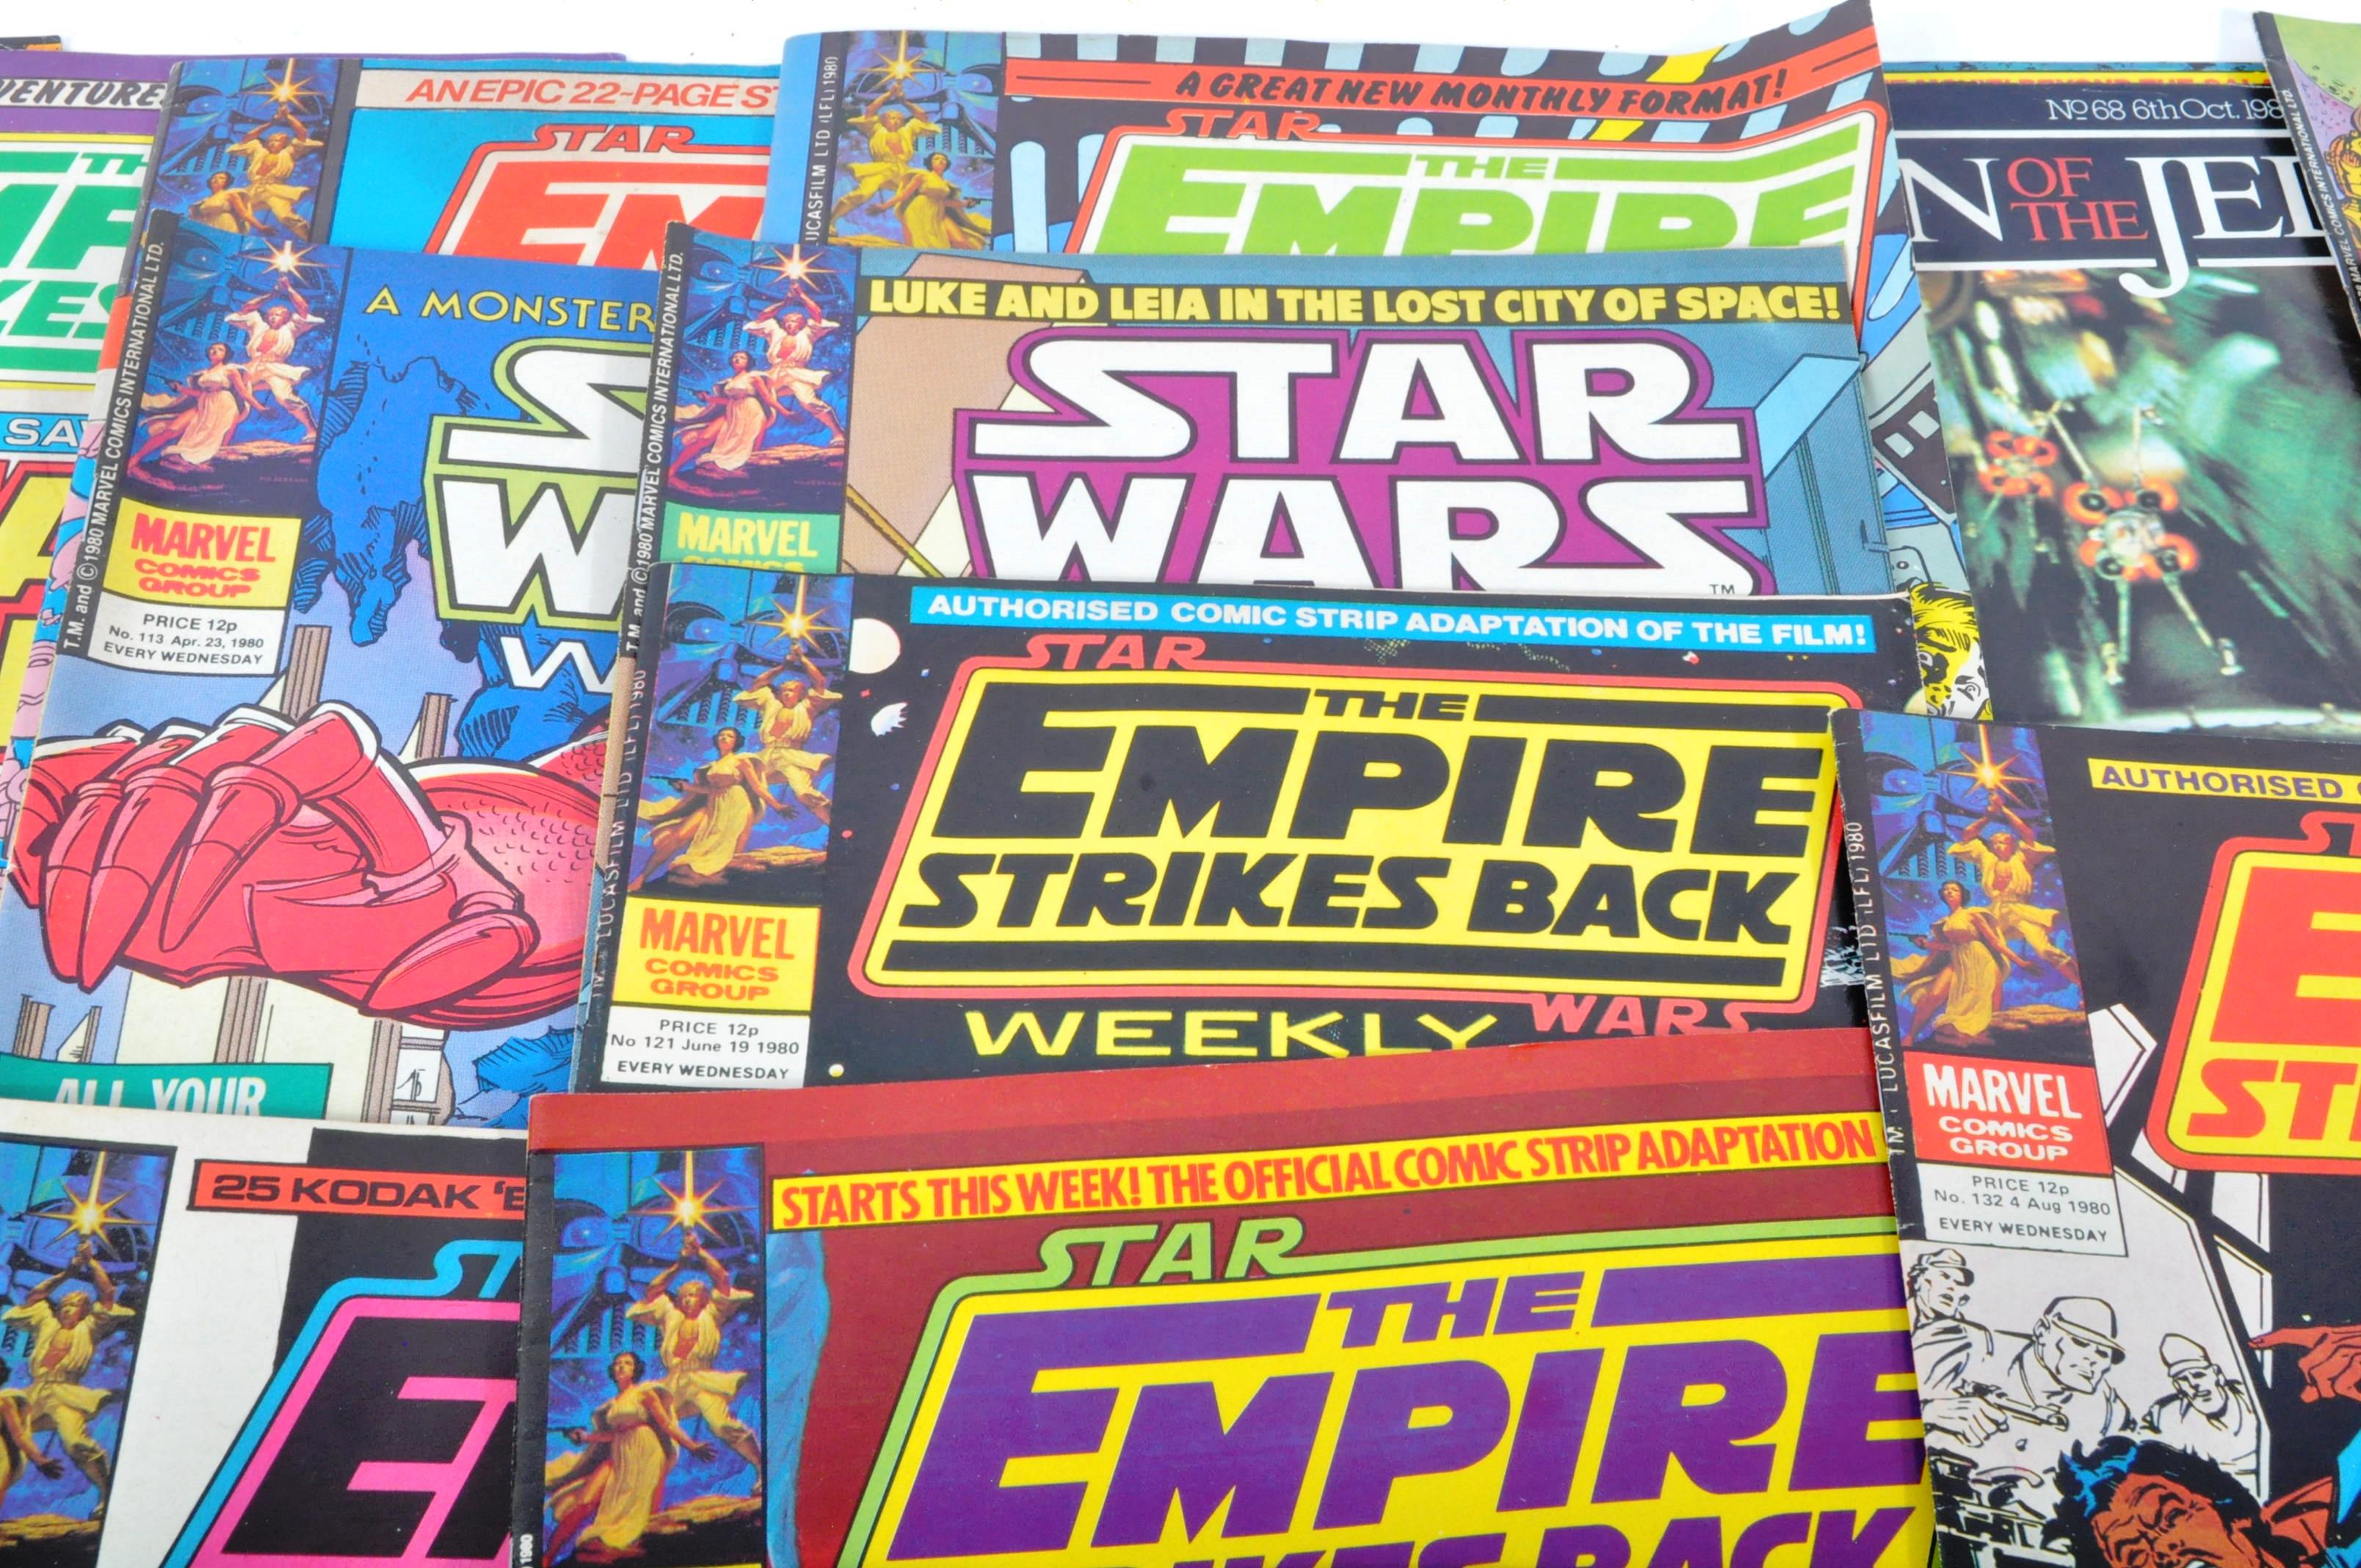 STAR WARS - COLLECTION OF MARVEL STAR WARS WEEKLY COMIC BOOKS - Image 3 of 9